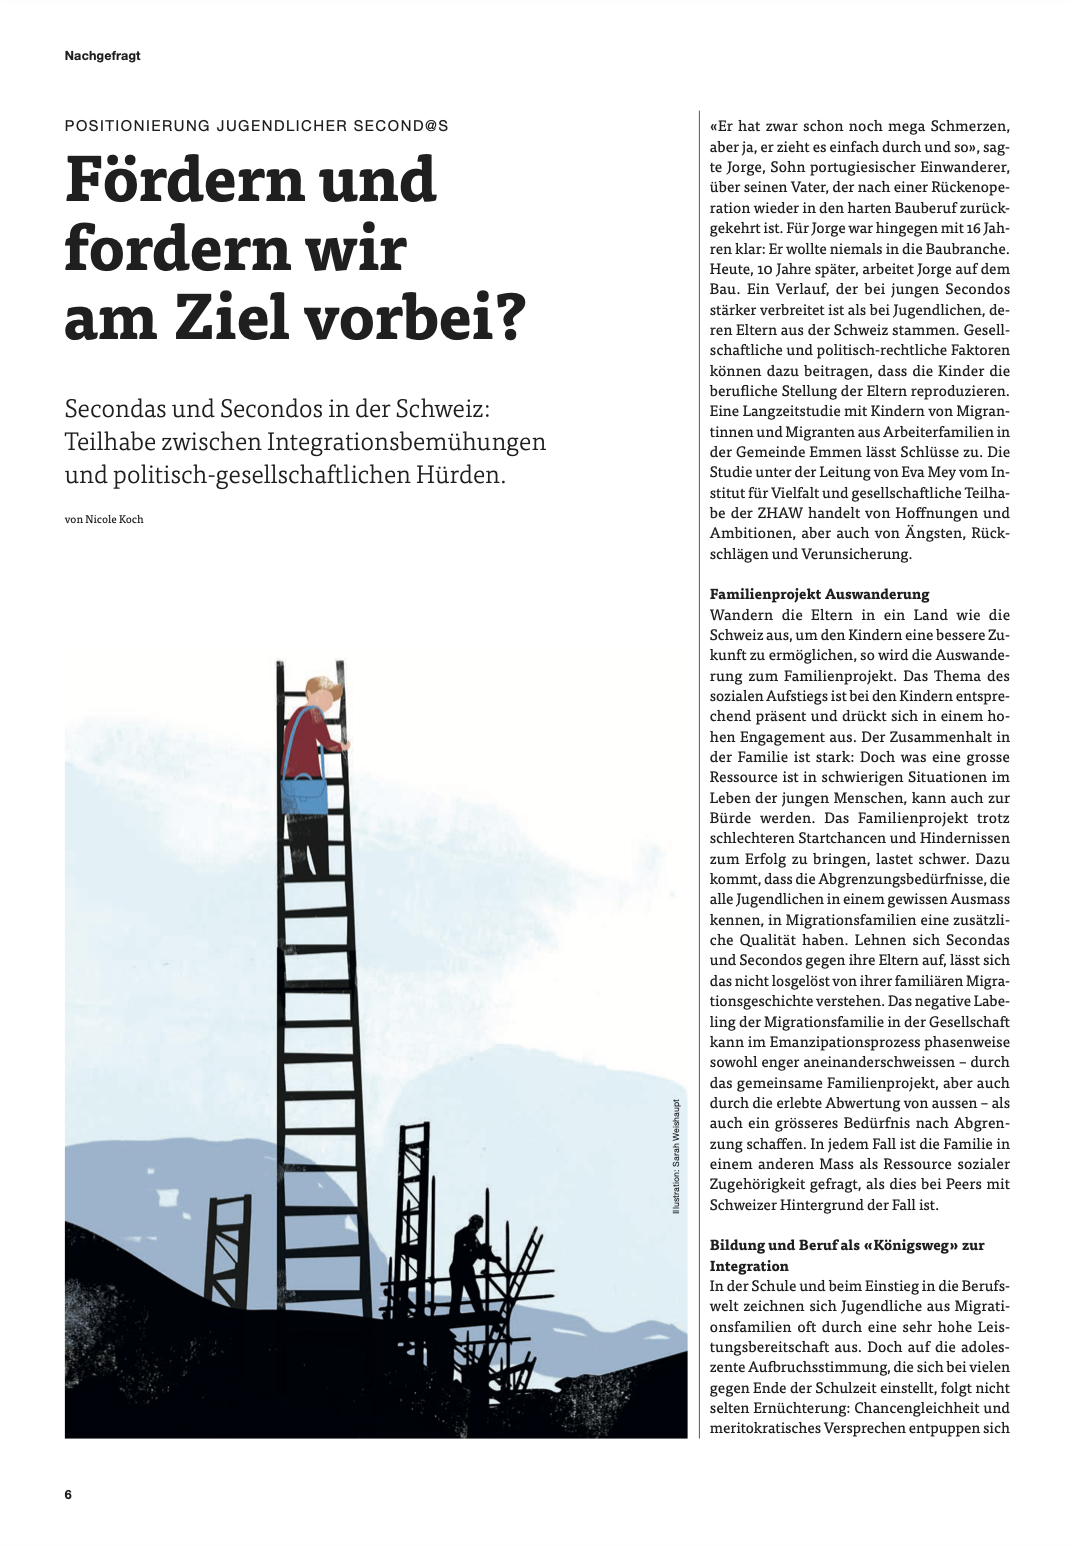 https://sarahweishaupt.ch/media/pages/home/magazin-zhaw-sozial/04c254c432-1681224862/sozial_1_4.png